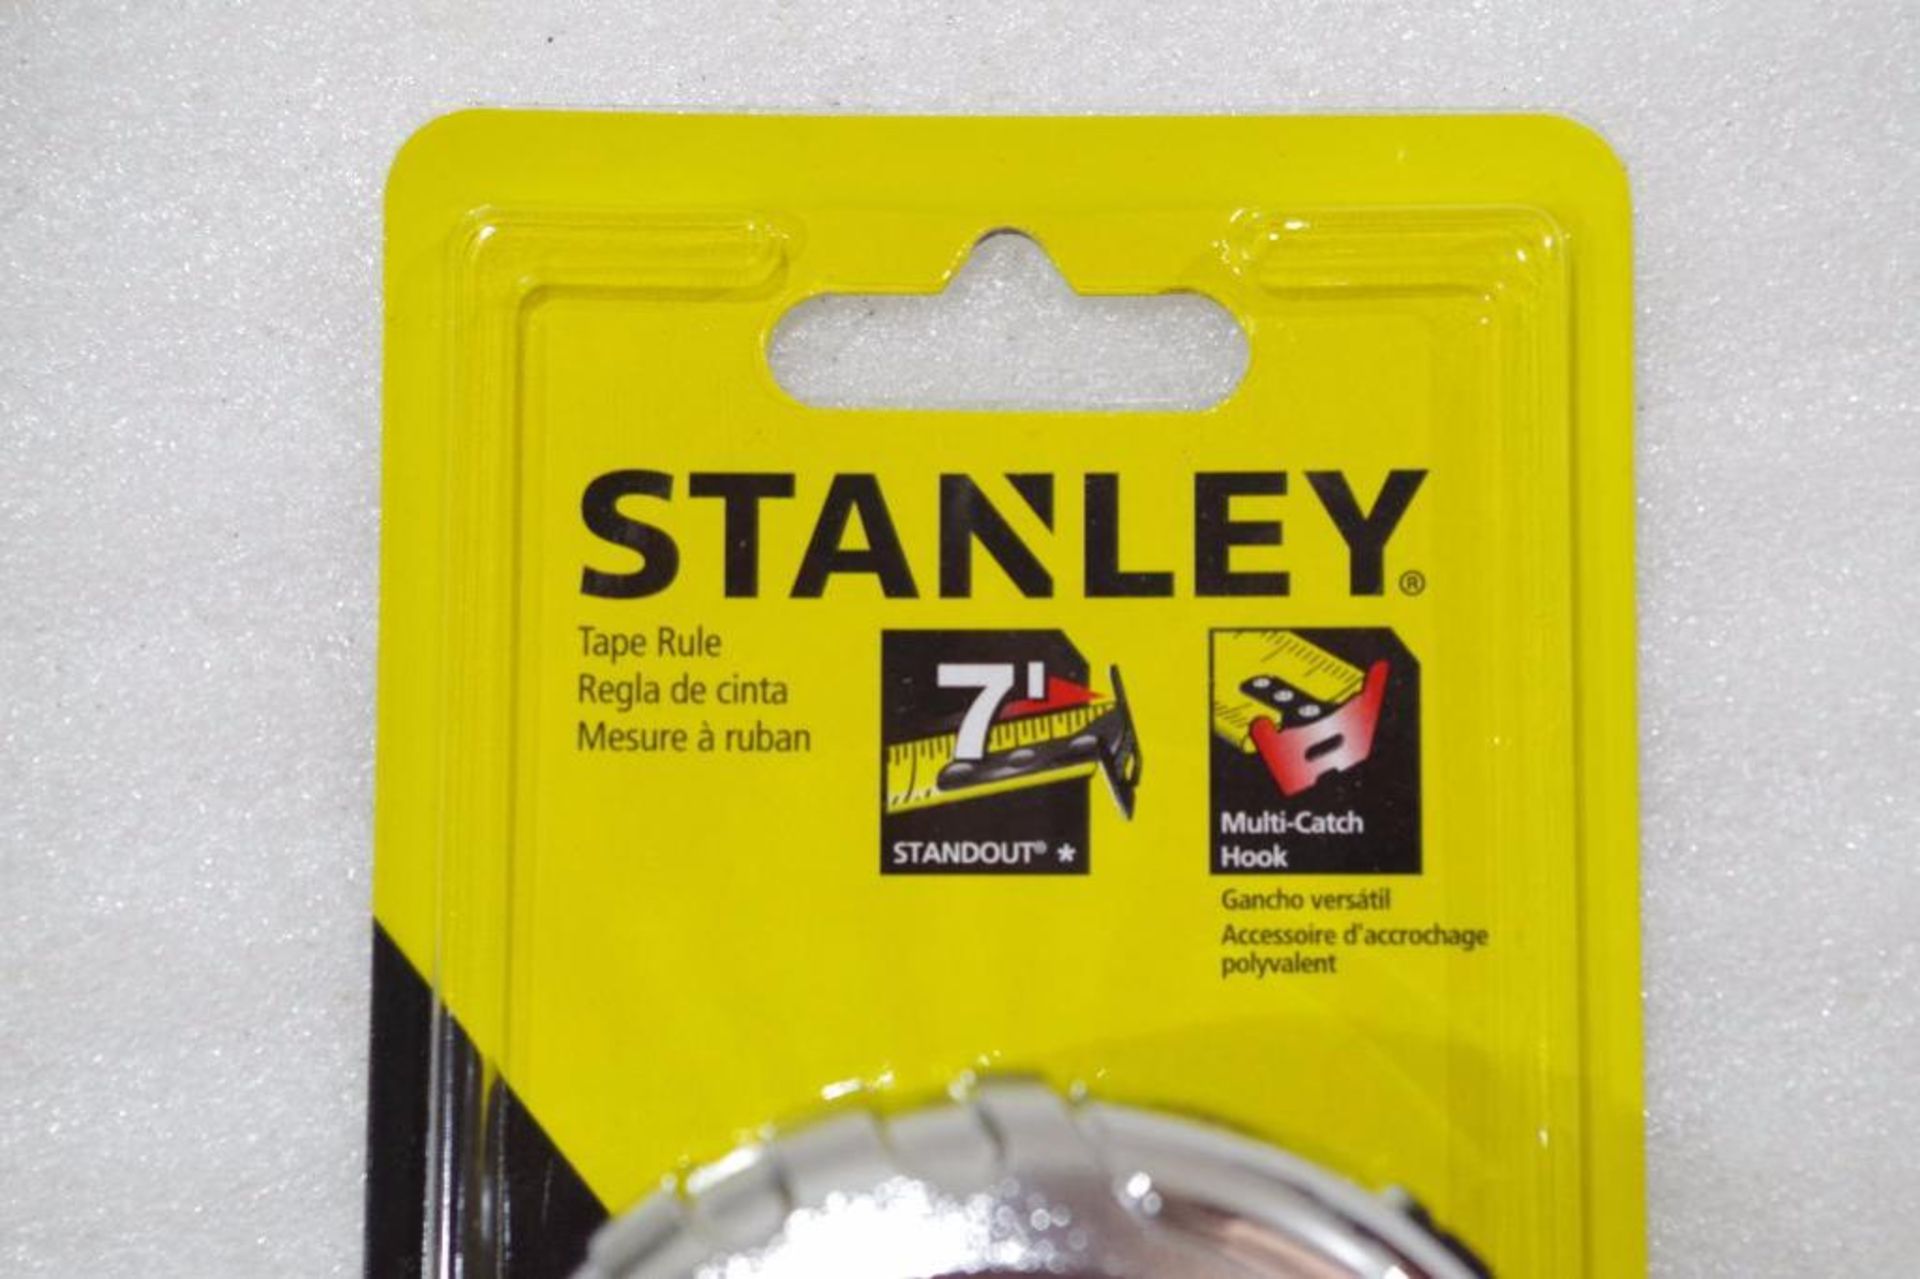 (2) NEW STANLEY Measuring Tools: Chrome 25' Tape Measure & Measuring Wheel, Measures up to 9,999 Ft. - Image 4 of 4